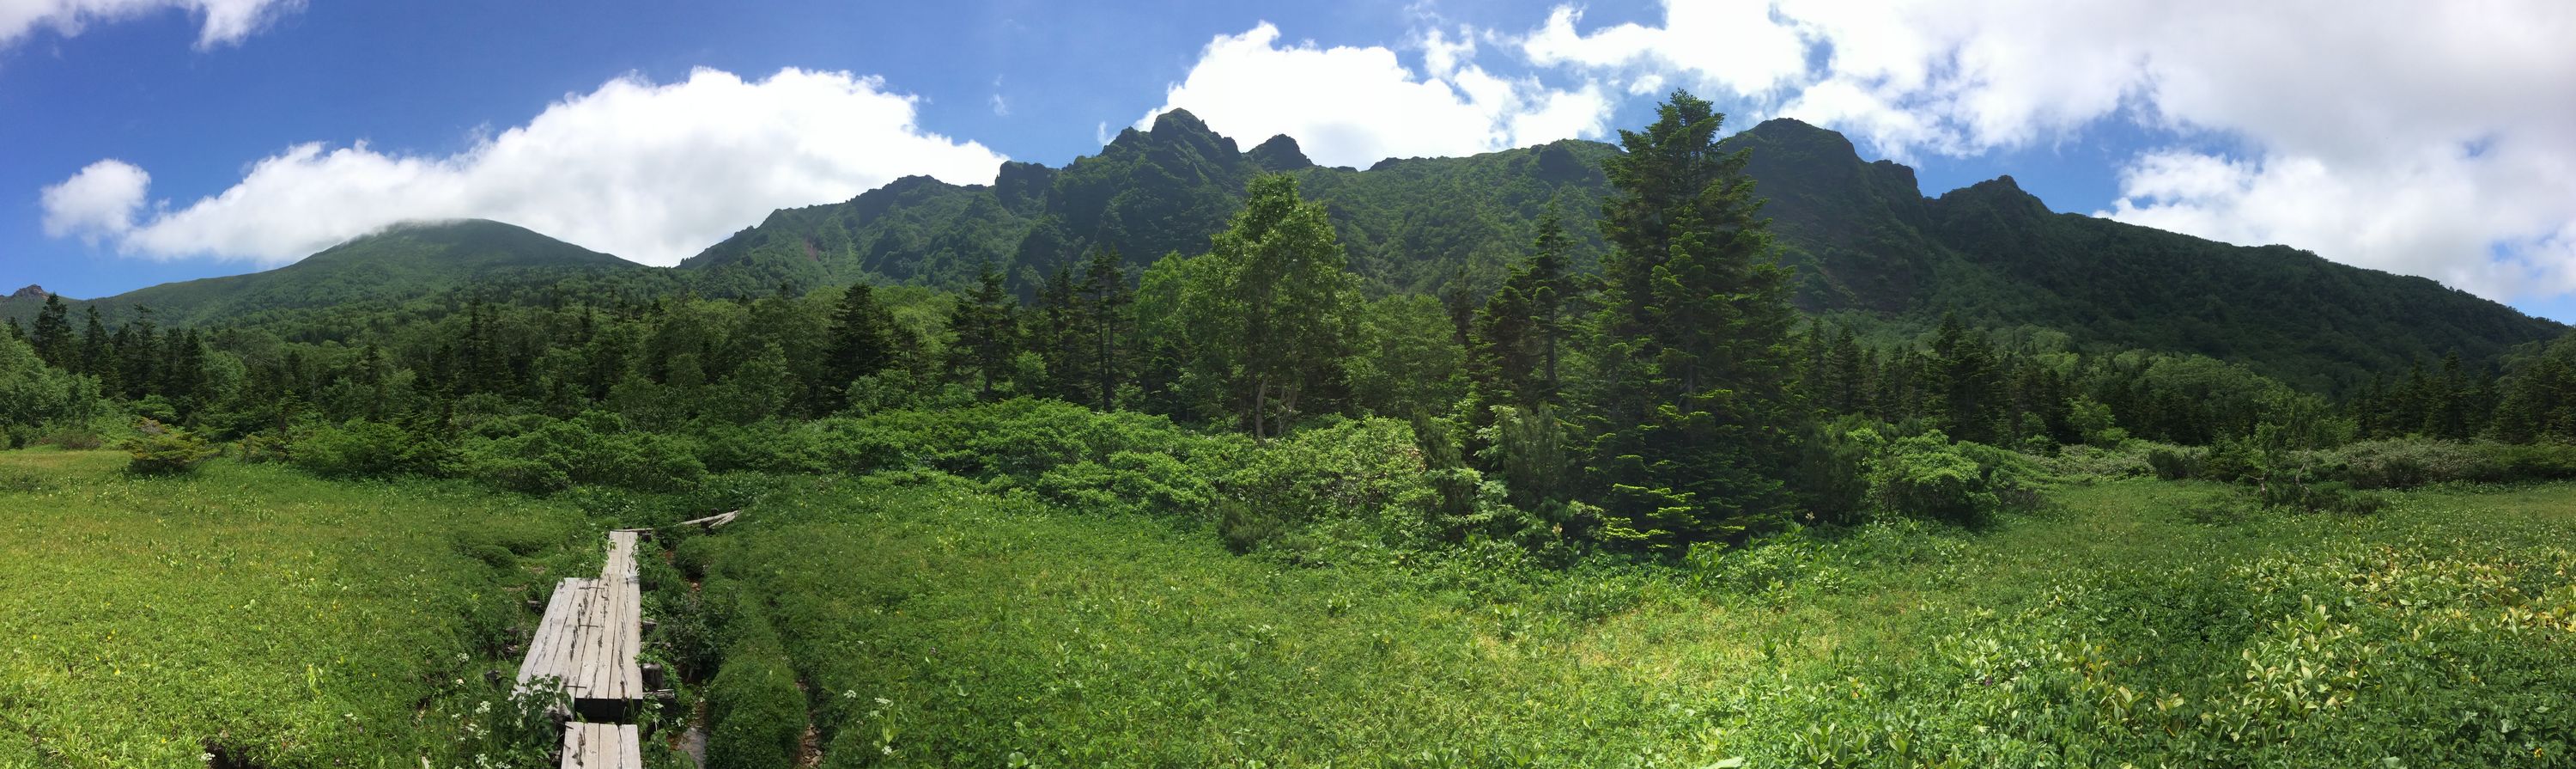 Panorama of a high meadow with duckboards leading across it.